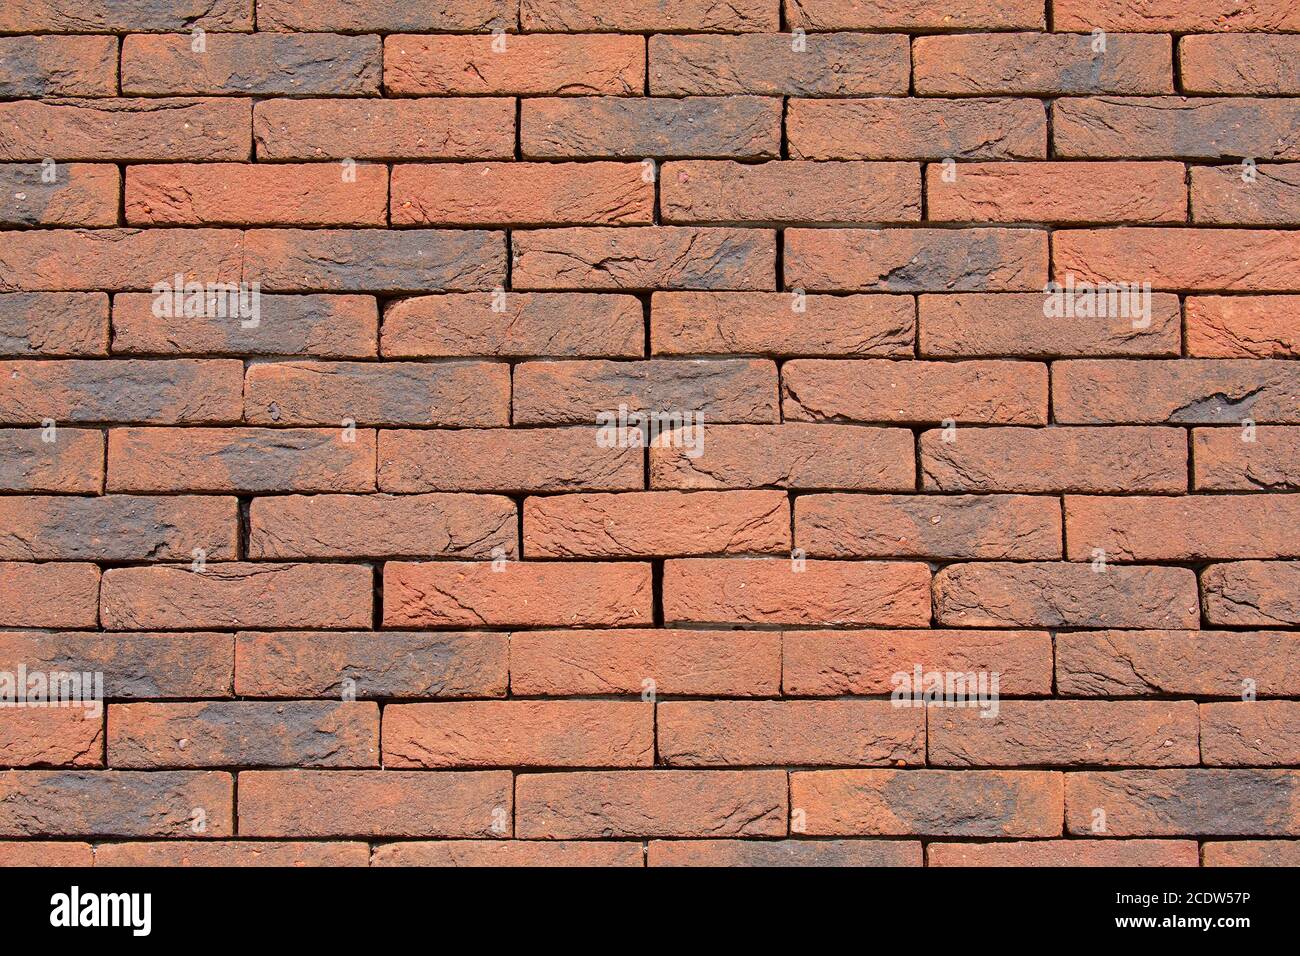 Background brick wall without cement joints Stock Photo